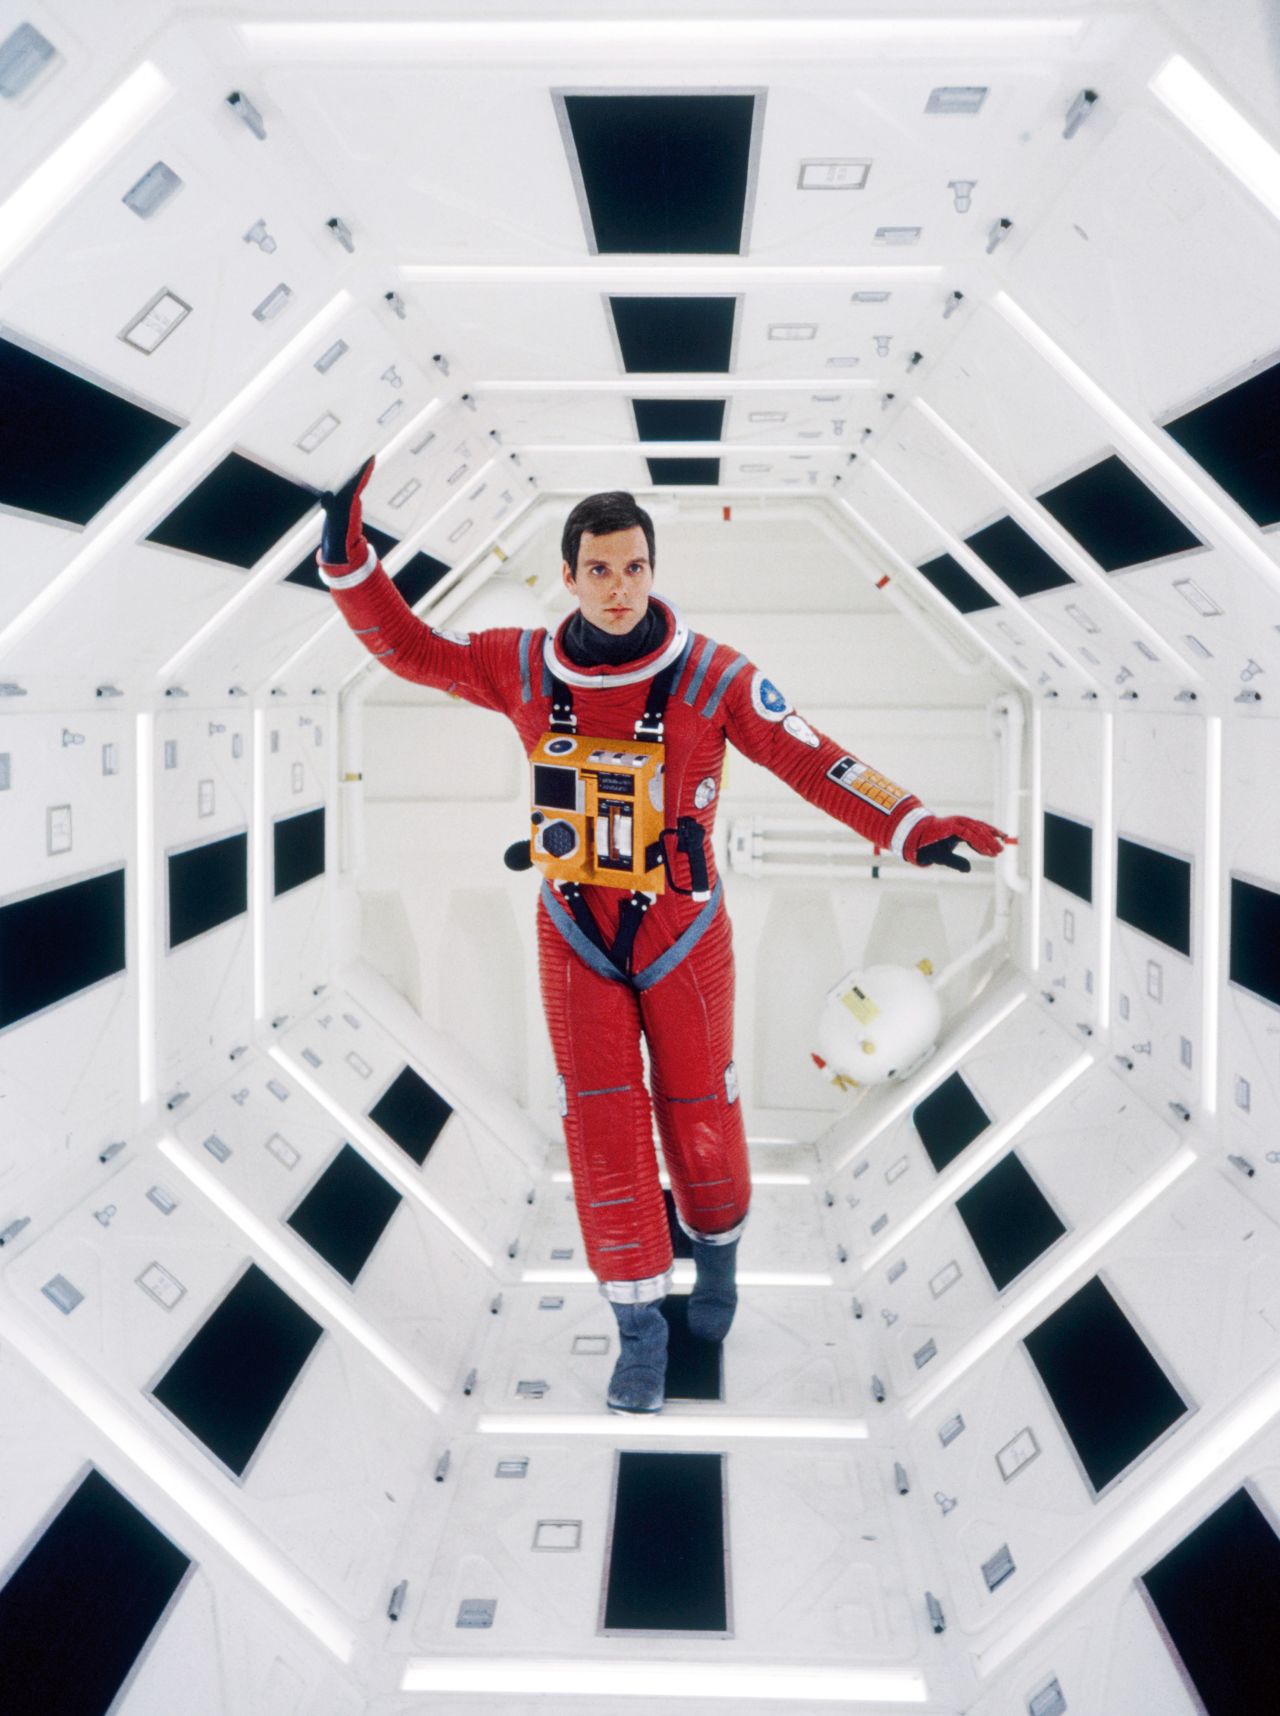 Keir Dullea, who played Dr. Dave Bowman, in an equipment storage corridor.